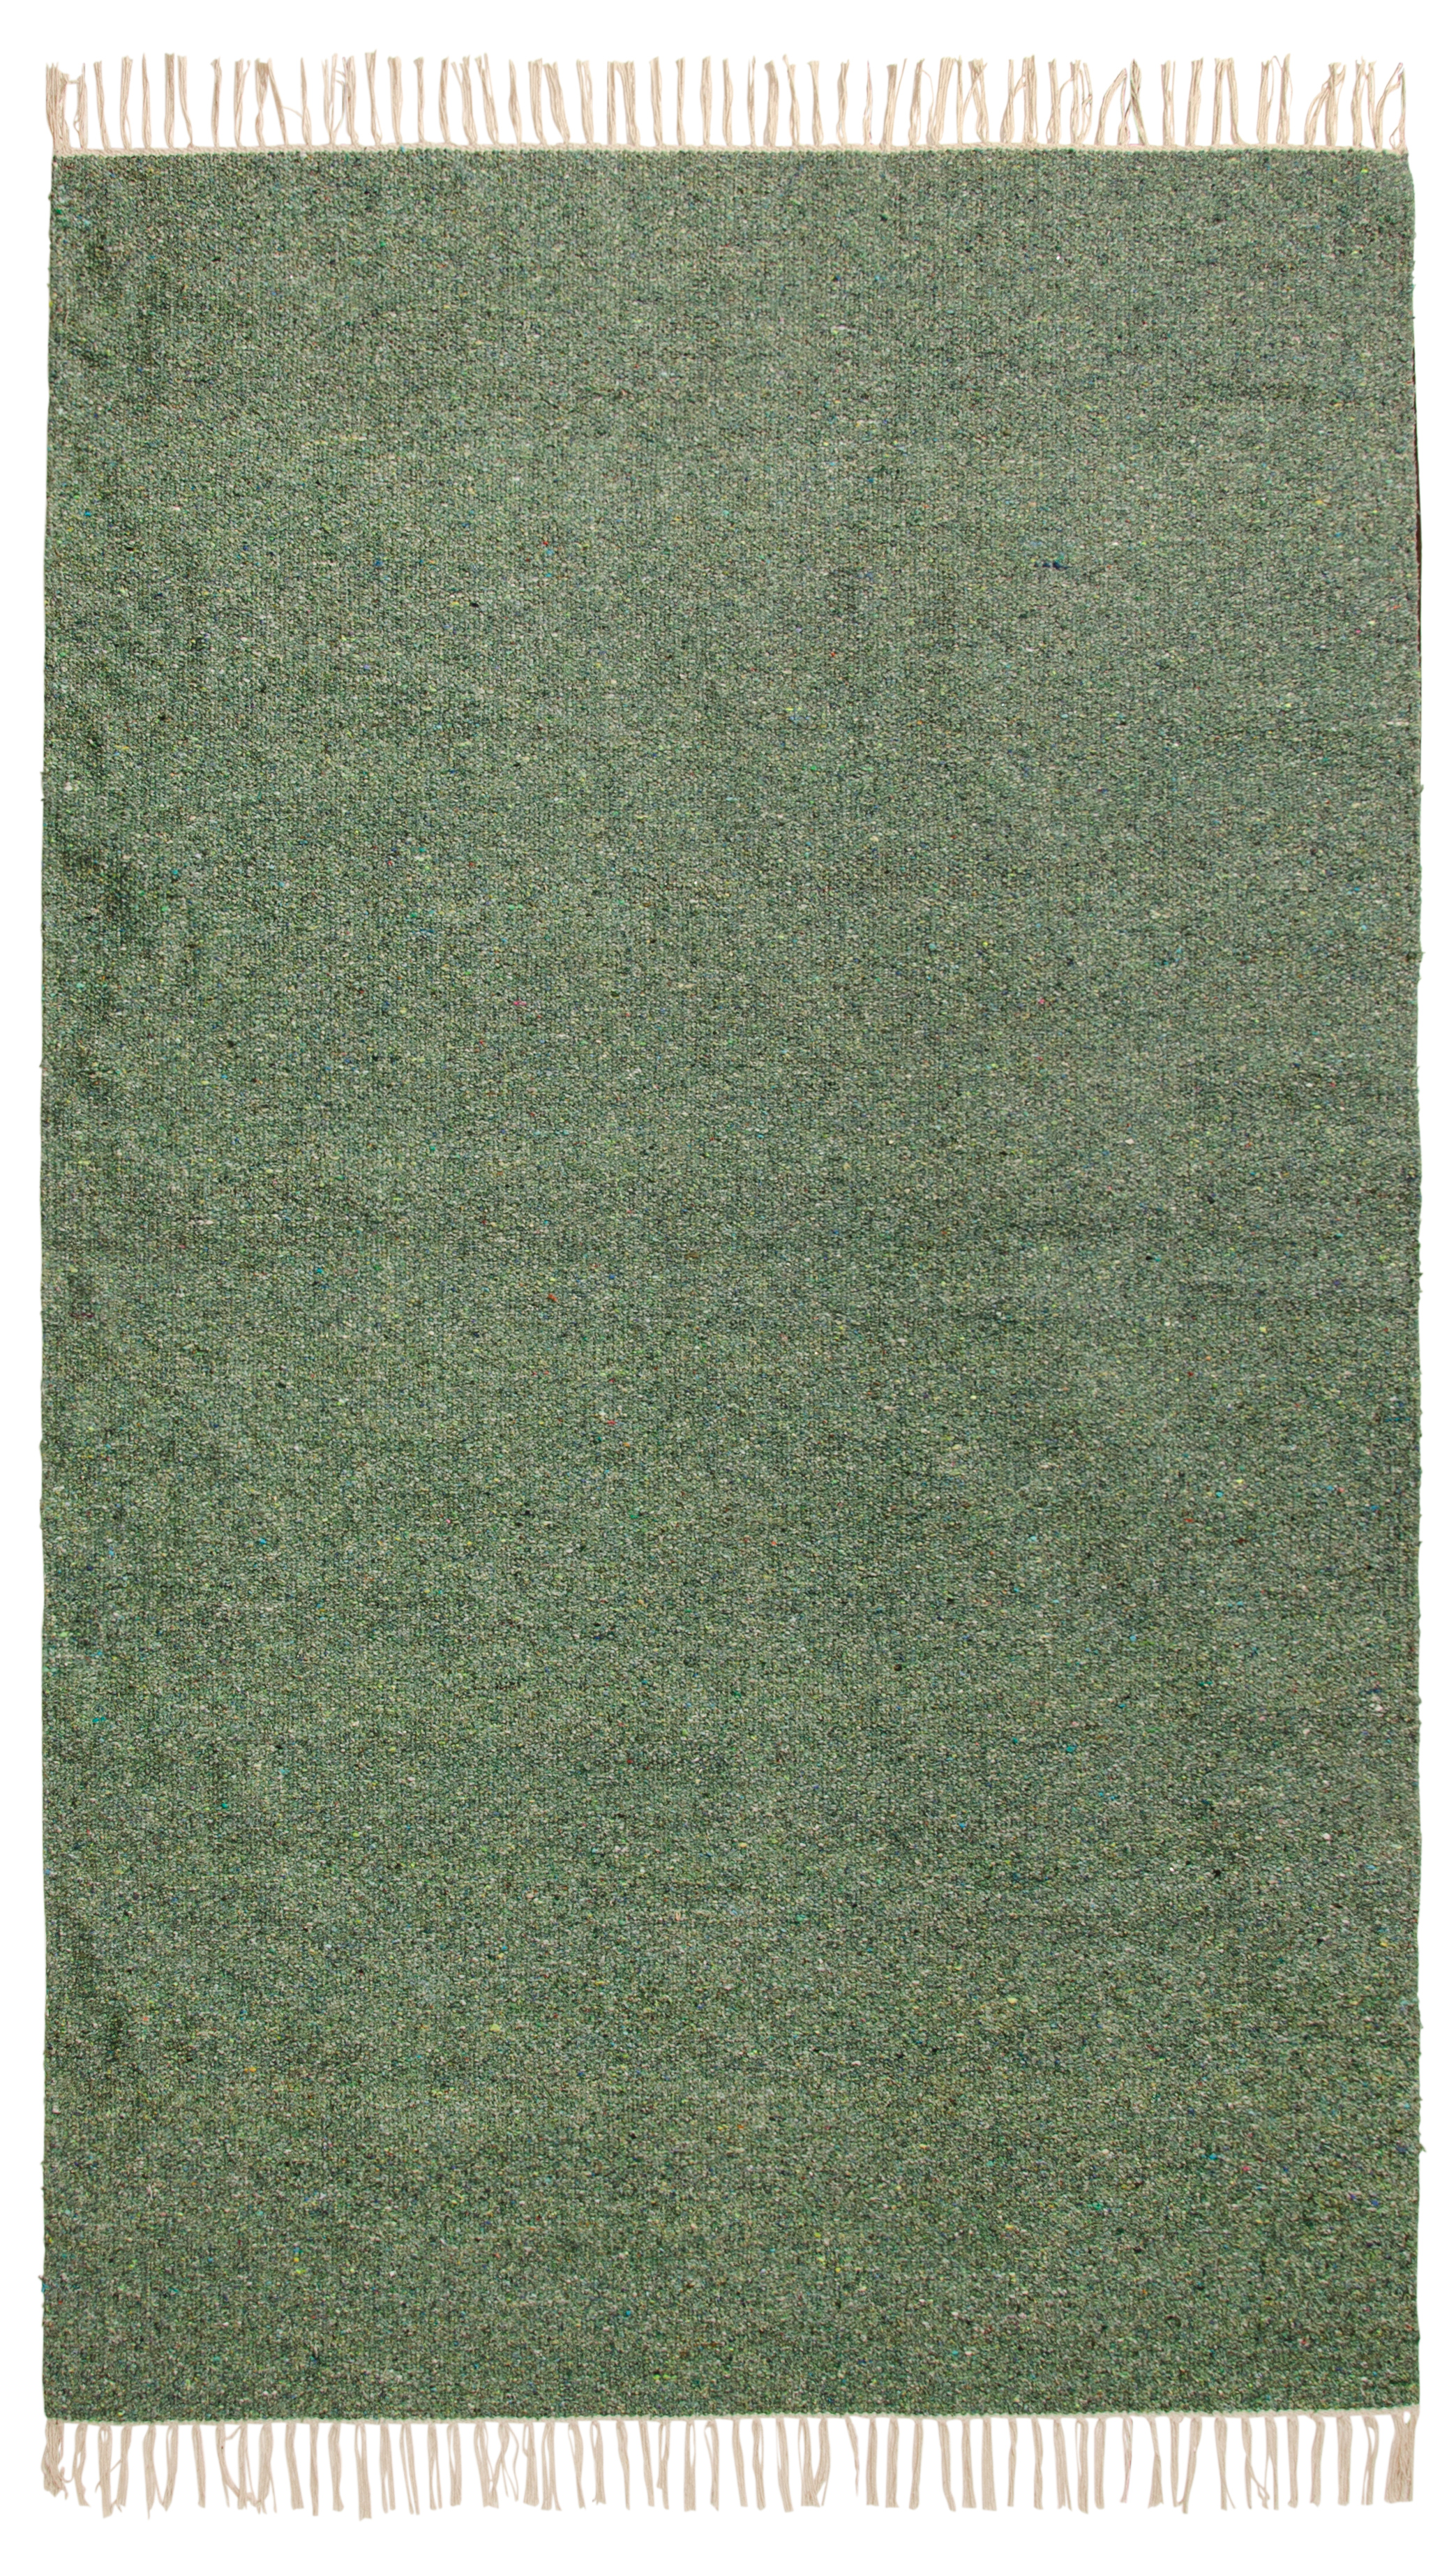 Plain Coloured Recycled Cotton Rug 120 x 180cm in 7 Colours Fair Trade GoodWeave